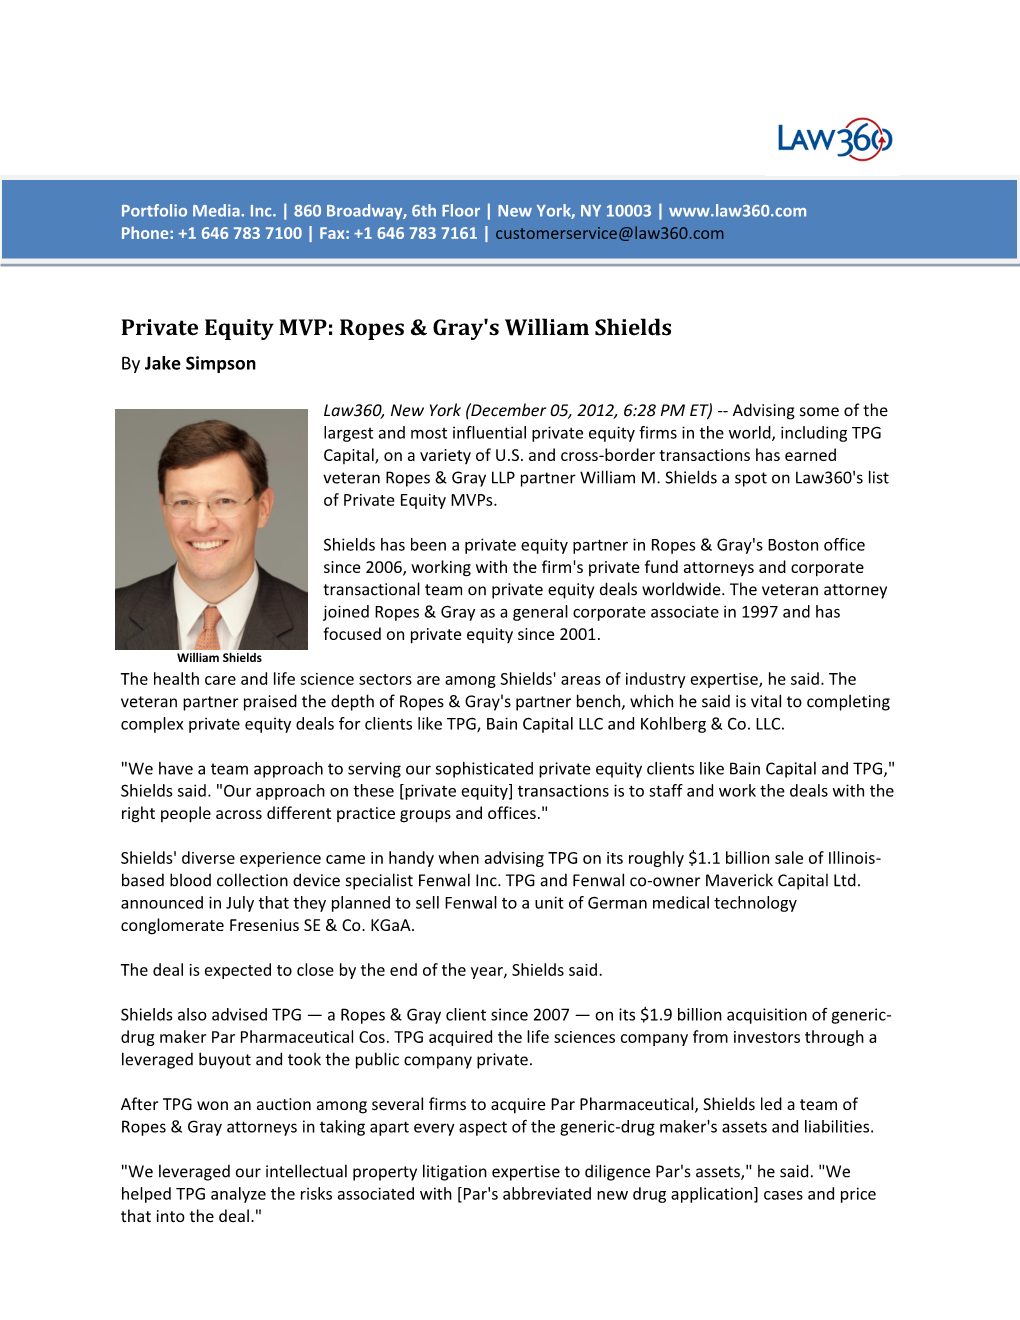 Private Equity MVP: Ropes & Gray's William Shields